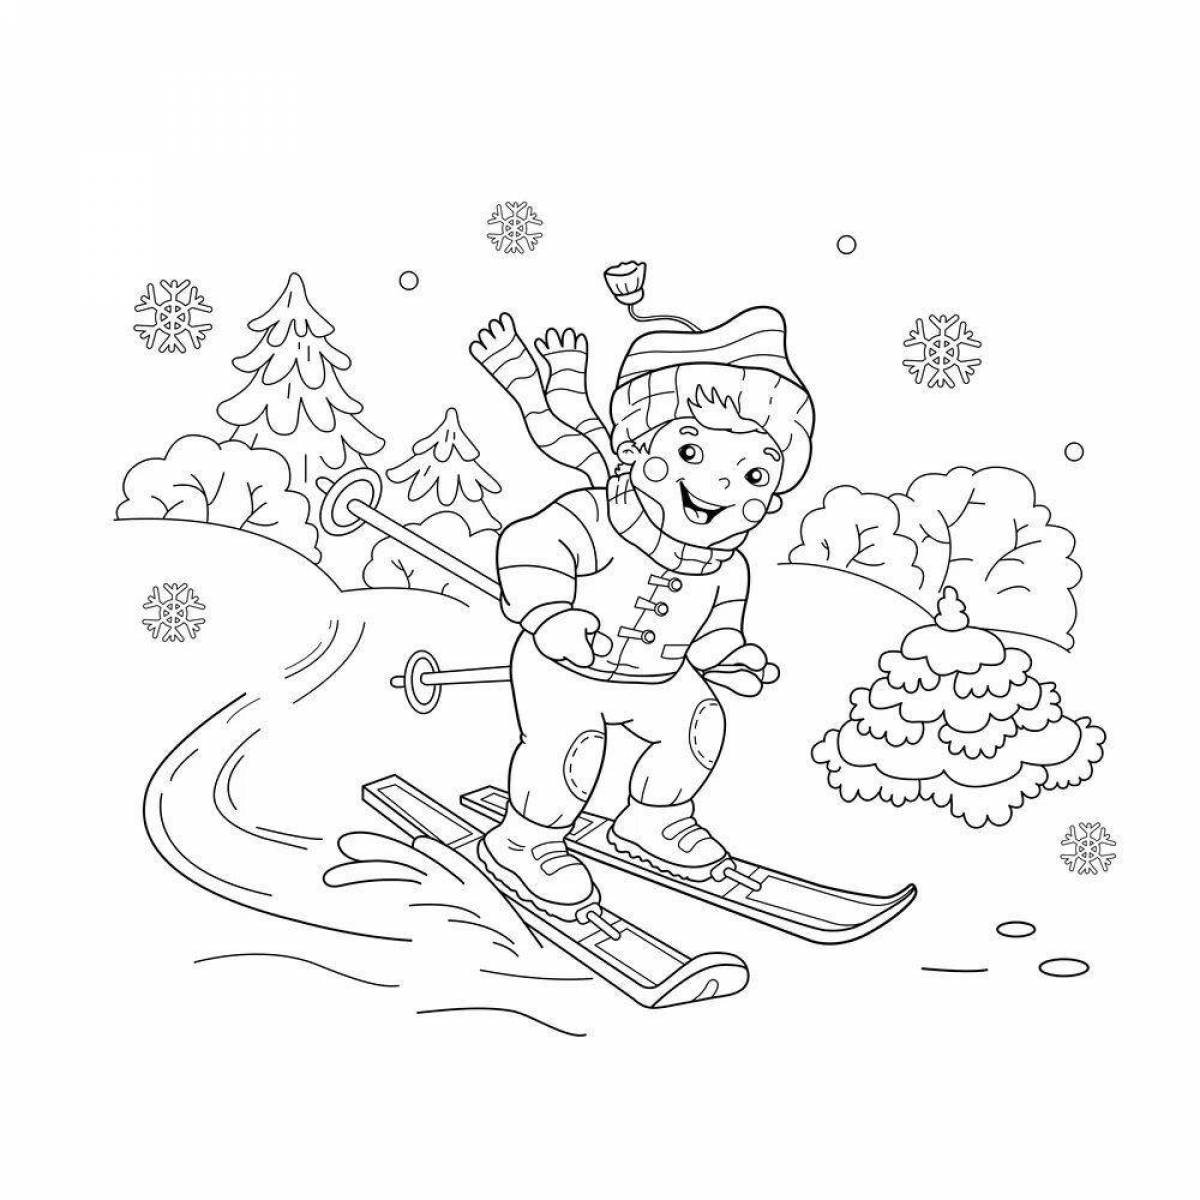 Fun skier coloring book for 6-7 year olds